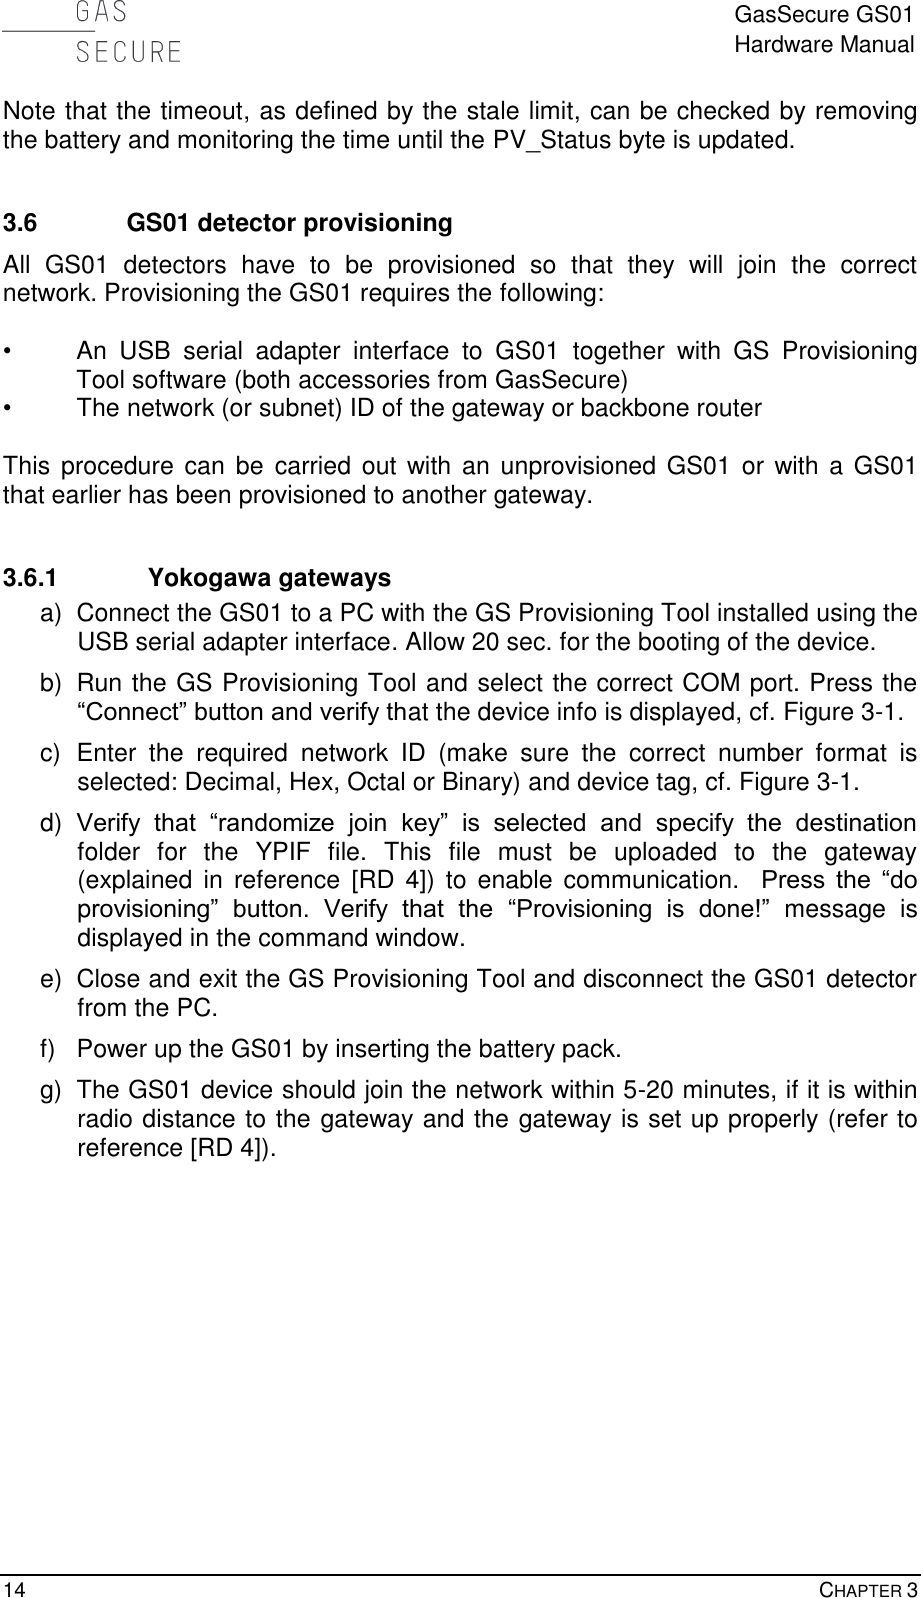  GasSecure GS01 Hardware Manual  14    CHAPTER 3 Note that the timeout, as defined by the stale limit, can be checked by removing the battery and monitoring the time until the PV_Status byte is updated.   3.6 GS01 detector provisioning All  GS01  detectors  have  to  be  provisioned  so  that  they  will  join  the  correct network. Provisioning the GS01 requires the following:  •  An  USB  serial  adapter  interface  to  GS01  together  with  GS  Provisioning Tool software (both accessories from GasSecure) •  The network (or subnet) ID of the gateway or backbone router  This procedure can be  carried out  with an unprovisioned GS01 or with a GS01 that earlier has been provisioned to another gateway.  3.6.1 Yokogawa gateways a)  Connect the GS01 to a PC with the GS Provisioning Tool installed using the USB serial adapter interface. Allow 20 sec. for the booting of the device. b)  Run the GS Provisioning Tool and select the correct COM port. Press the “Connect” button and verify that the device info is displayed, cf. Figure 3-1. c)  Enter  the  required  network  ID  (make  sure  the  correct  number  format  is selected: Decimal, Hex, Octal or Binary) and device tag, cf. Figure 3-1. d) Verify  that  “randomize  join  key”  is  selected  and  specify  the  destination folder  for  the  YPIF  file.  This  file  must  be  uploaded  to  the  gateway (explained  in  reference  [RD  4])  to  enable  communication.    Press  the  “do provisioning”  button.  Verify  that  the  “Provisioning  is  done!”  message  is displayed in the command window. e)  Close and exit the GS Provisioning Tool and disconnect the GS01 detector from the PC. f)  Power up the GS01 by inserting the battery pack. g)  The GS01 device should join the network within 5-20 minutes, if it is within radio distance to the gateway and the gateway is set up properly (refer to reference [RD 4]).  